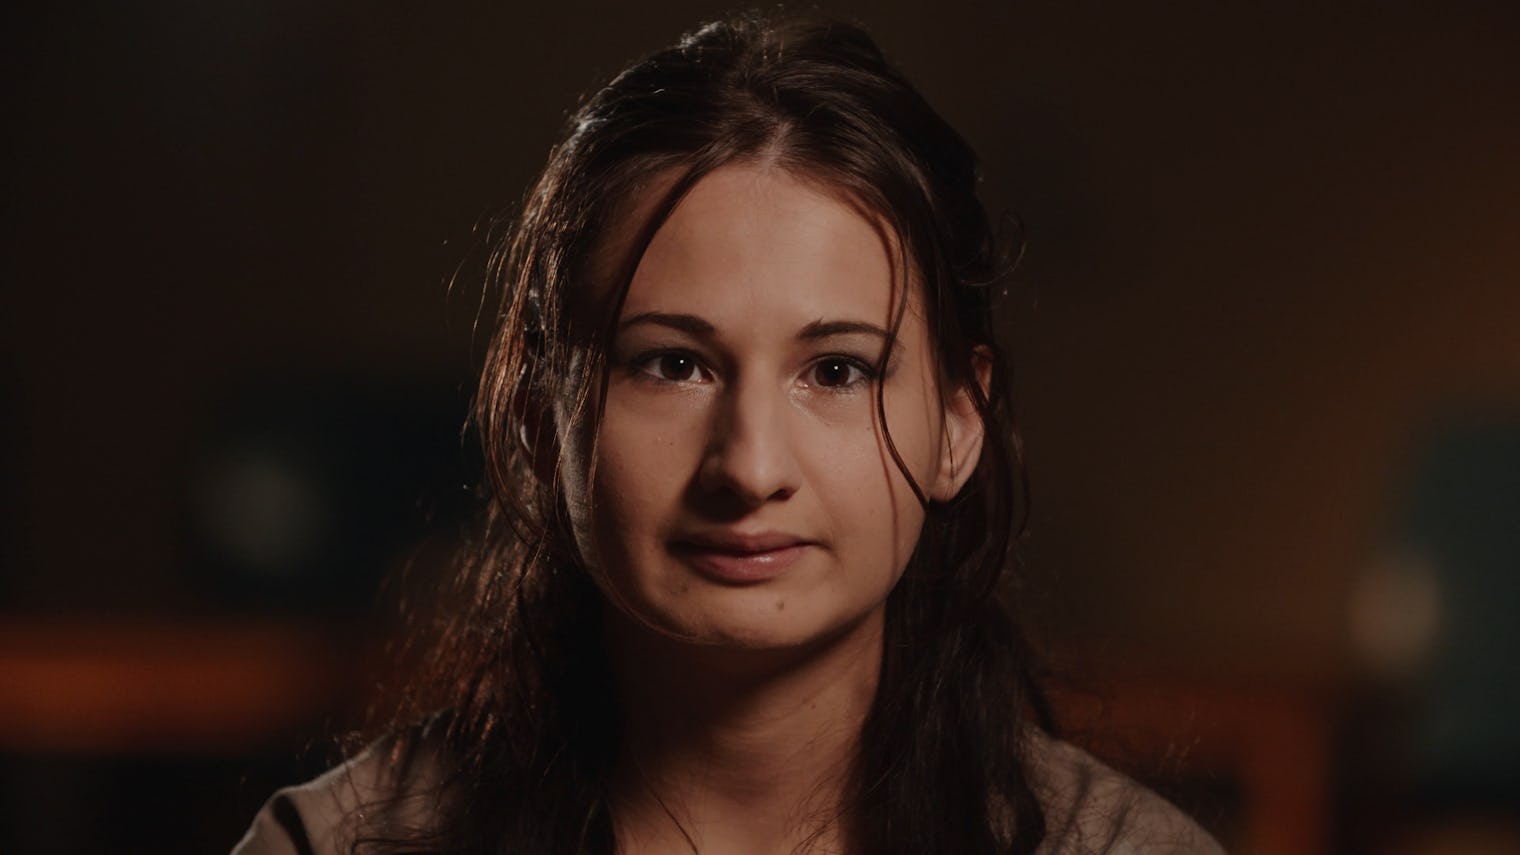 Is Gypsy Rose Blanchard Still In Prison In 2018 She Doesn T Look At Jail Like Most People Do